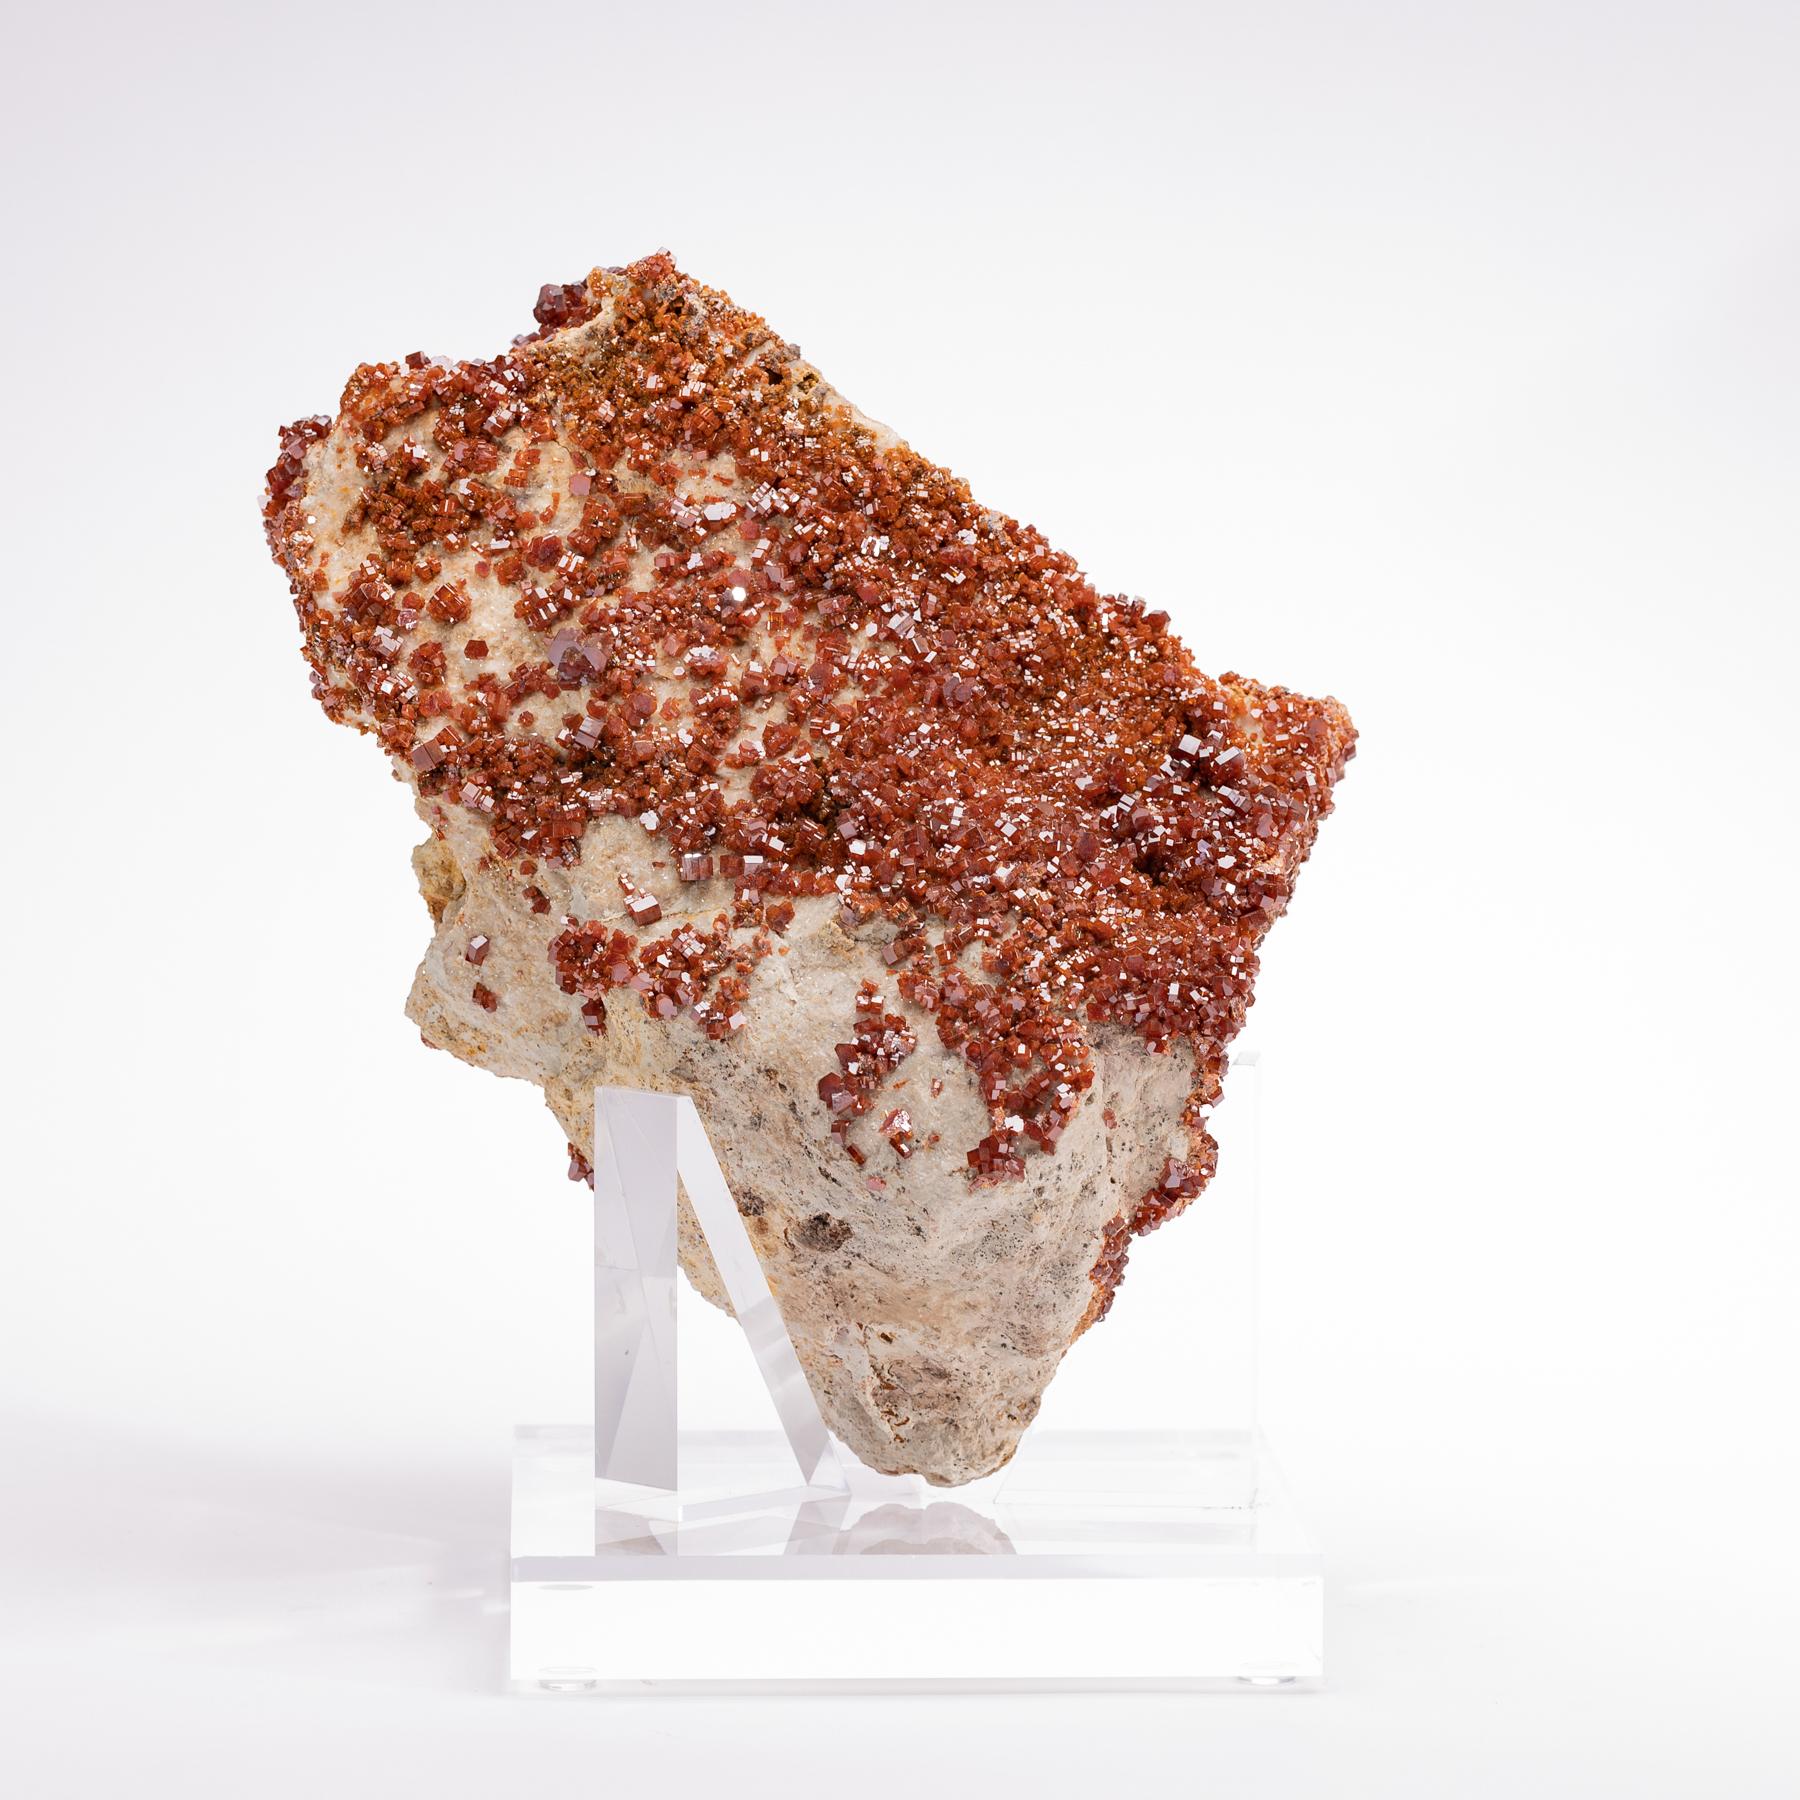 Top quality vanadinite crystals with vibrant red / orange colors and lots of blink mounted on custom acrylic base.